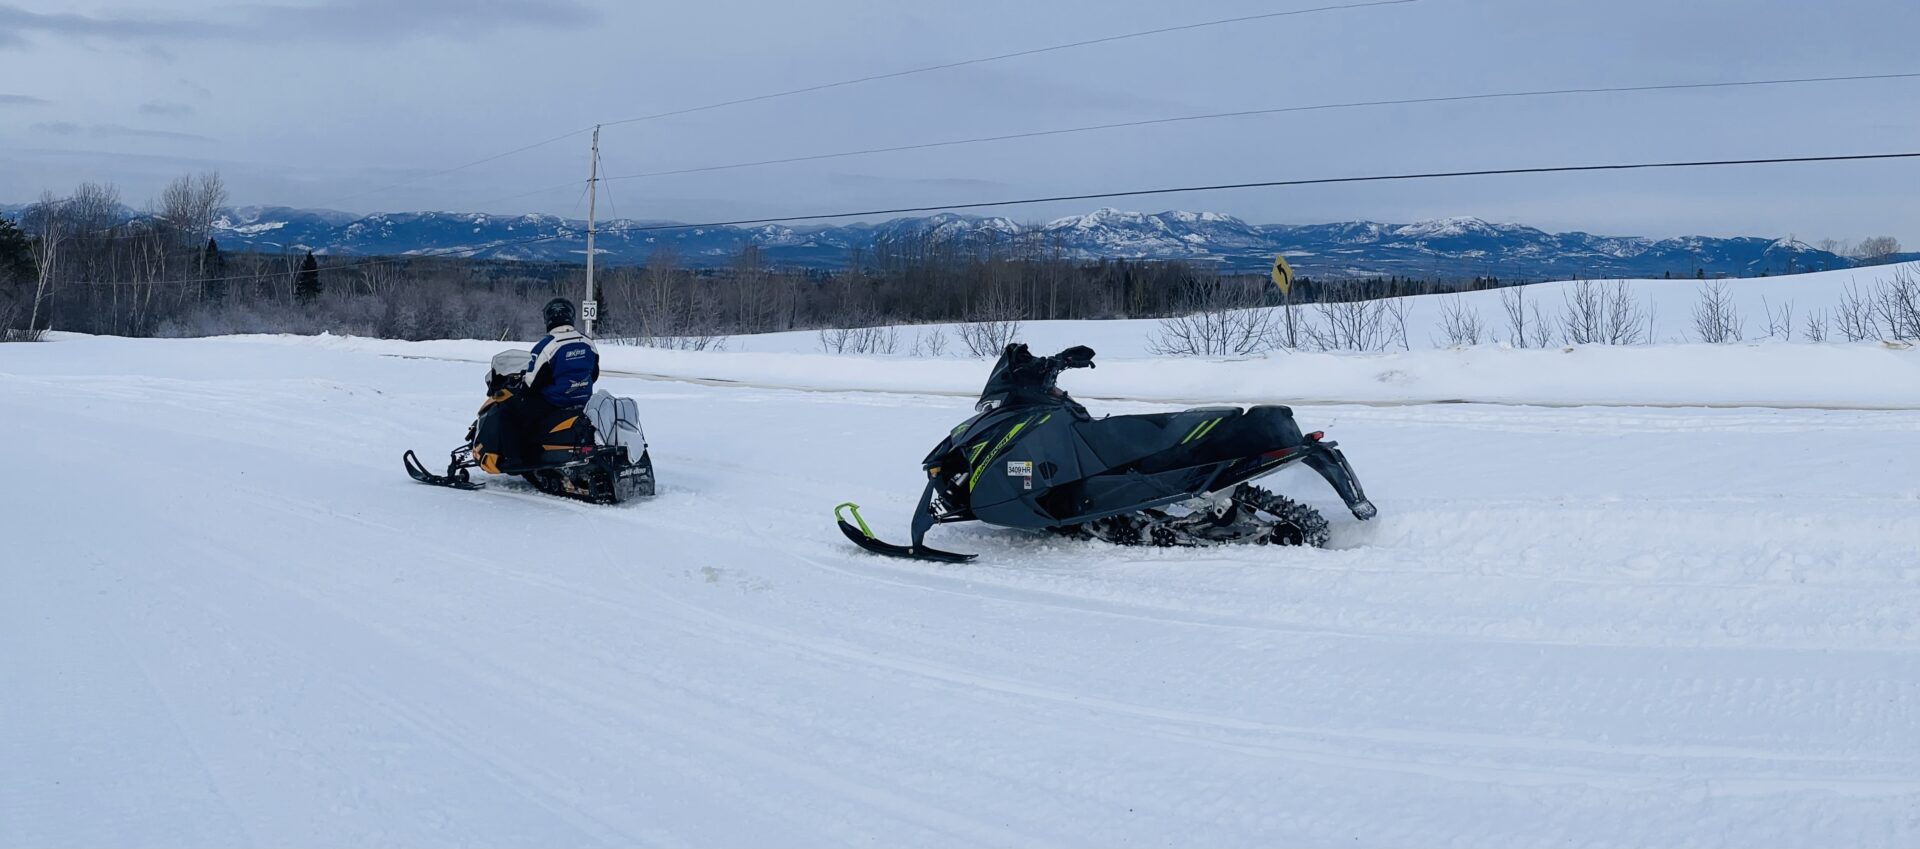 A person on a snow mobile in the snow.